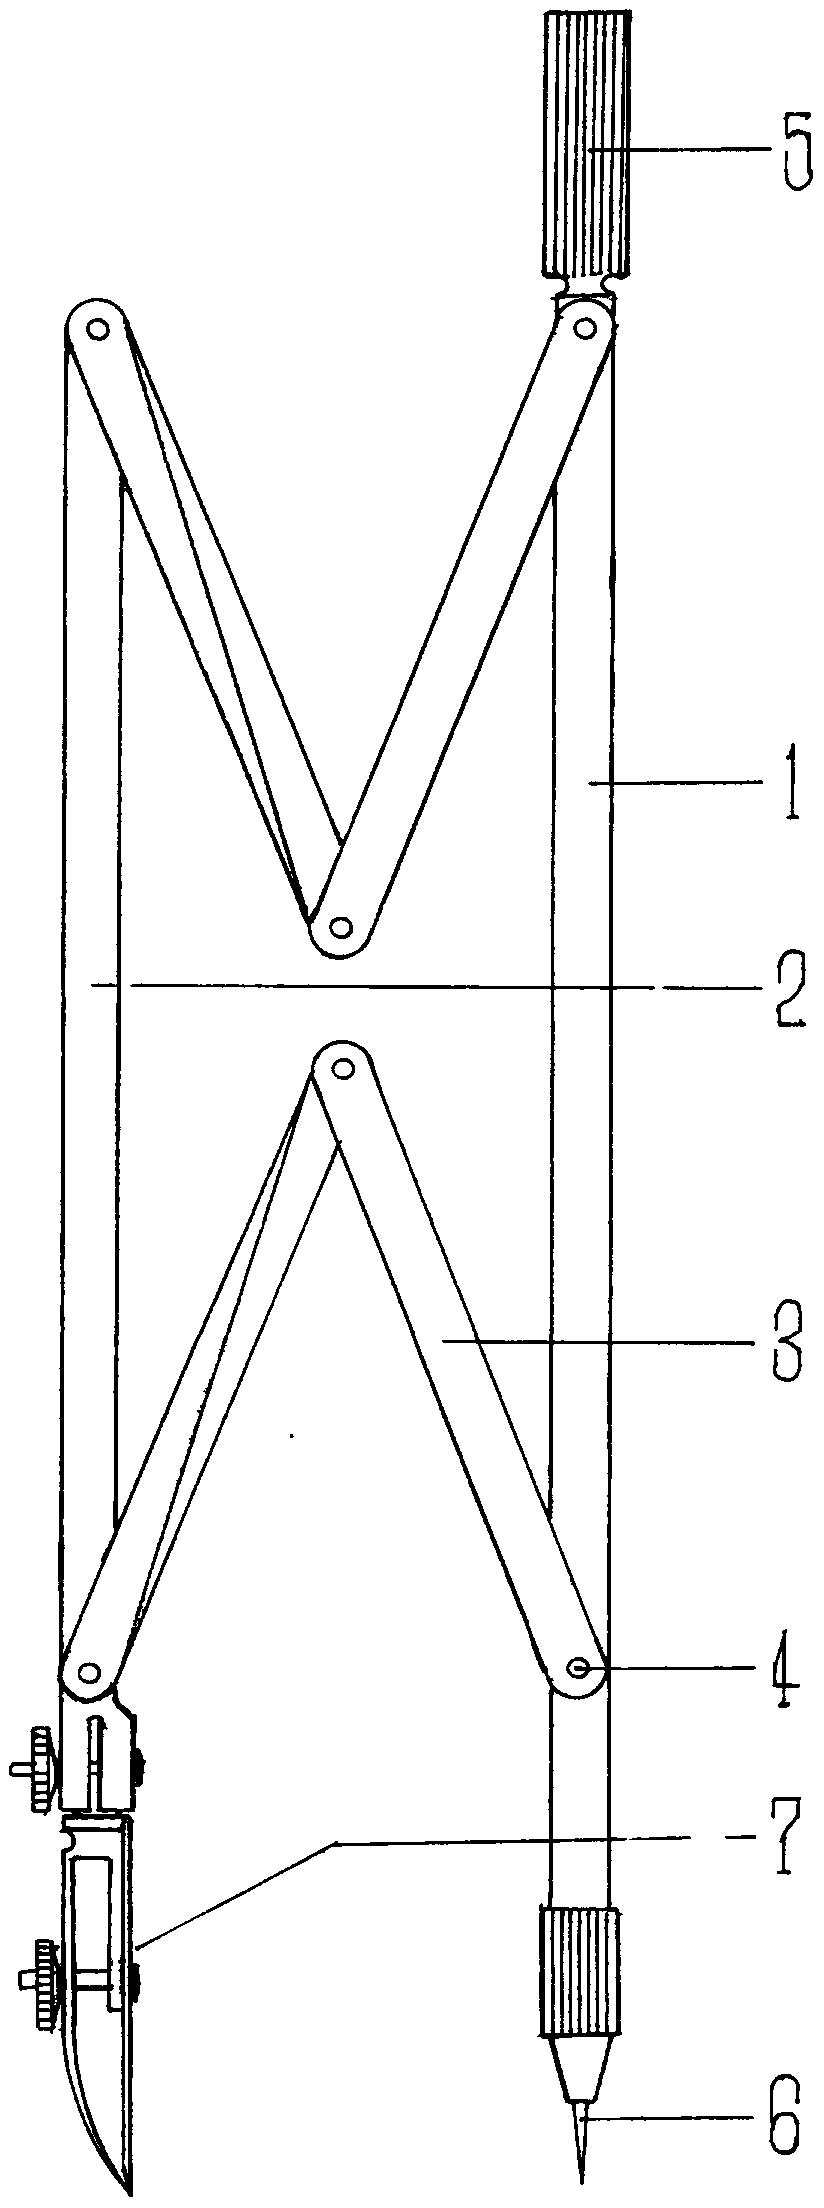 Two-leg parallel compass with single-leg horizontal stretching and retracting function